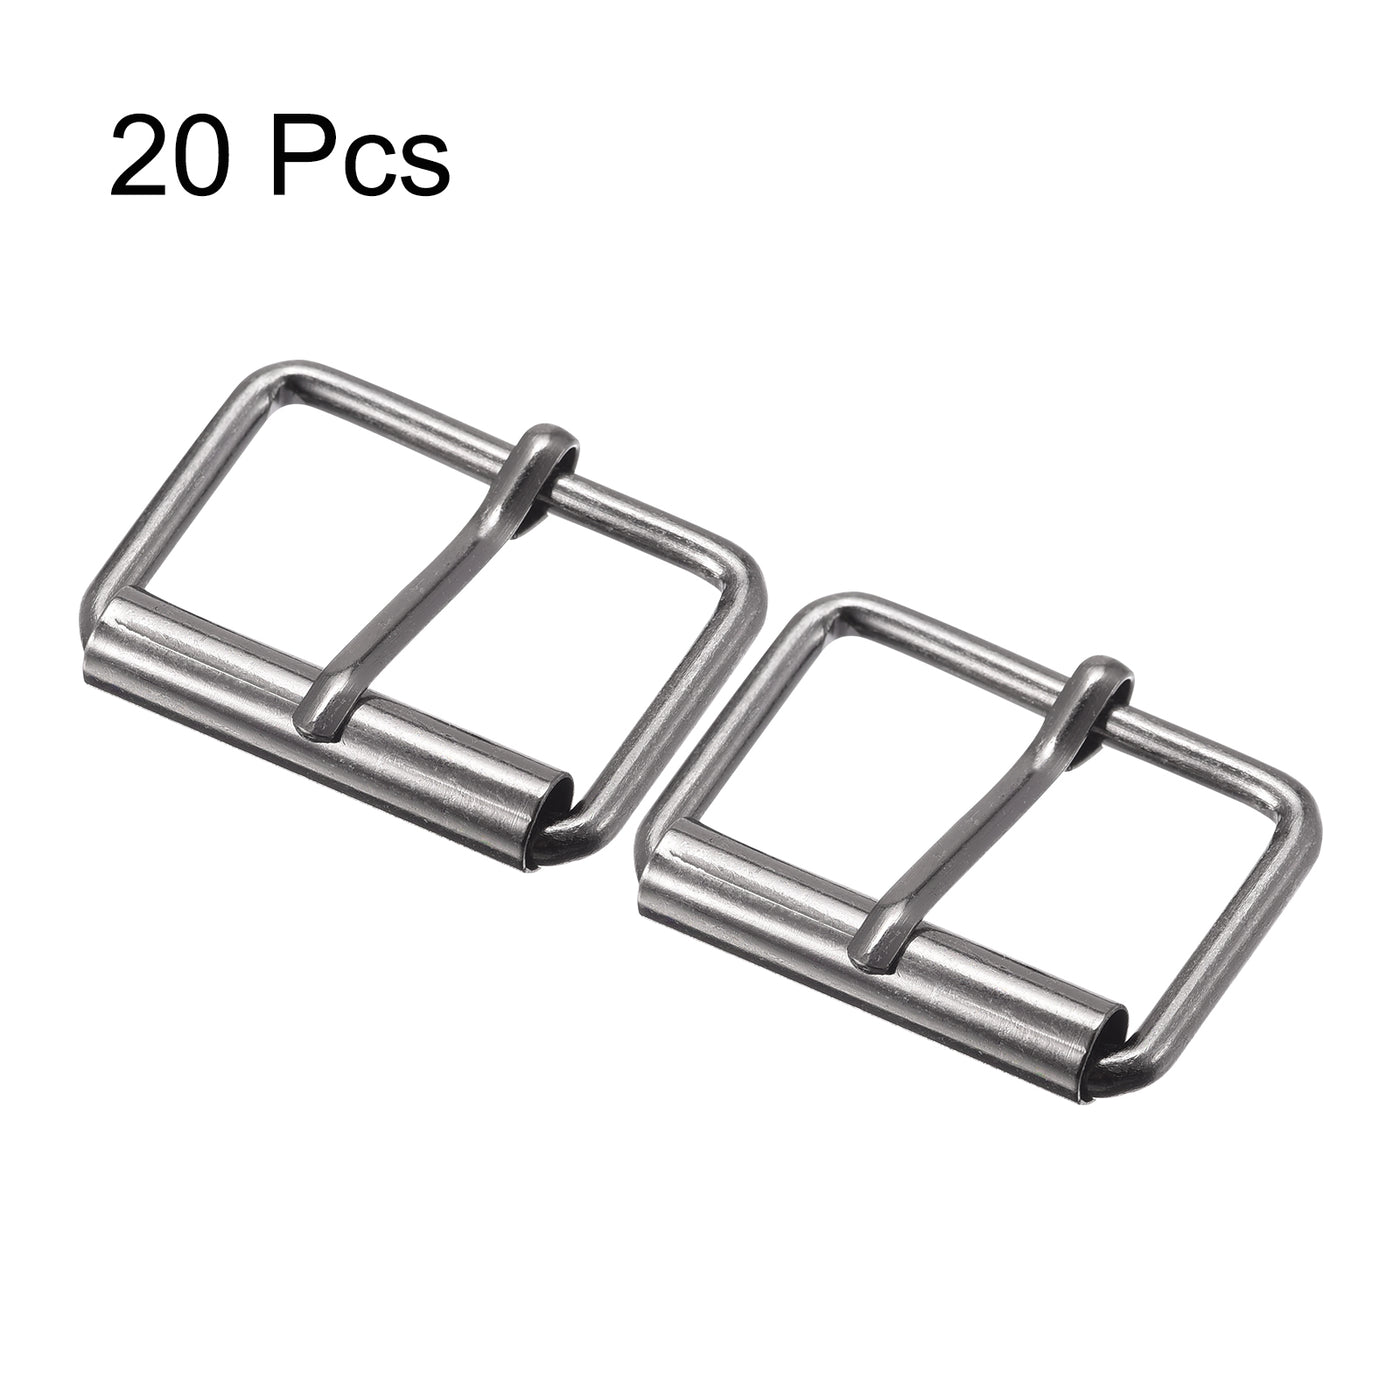 uxcell Uxcell 30mm(1.18") Metal Roller Buckles for Belts Bags Straps DIY Dark Gray 20pcs